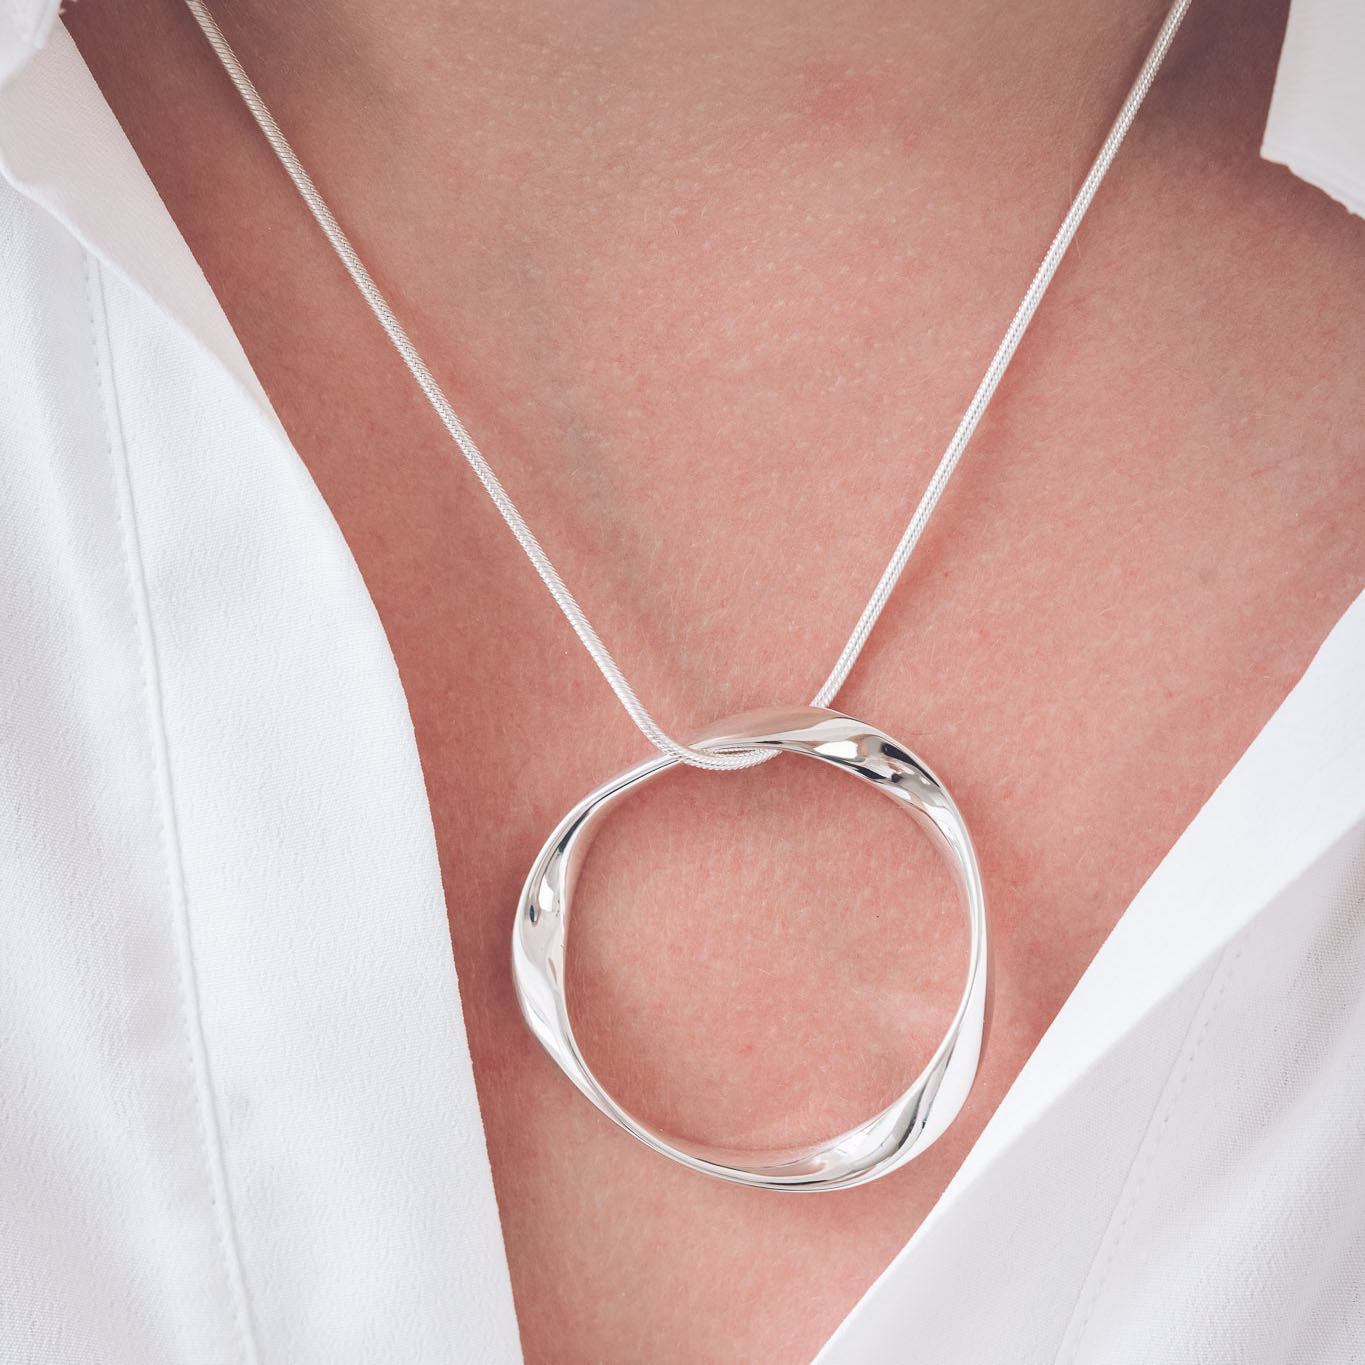 Silver, Open Curved Circle Pendant